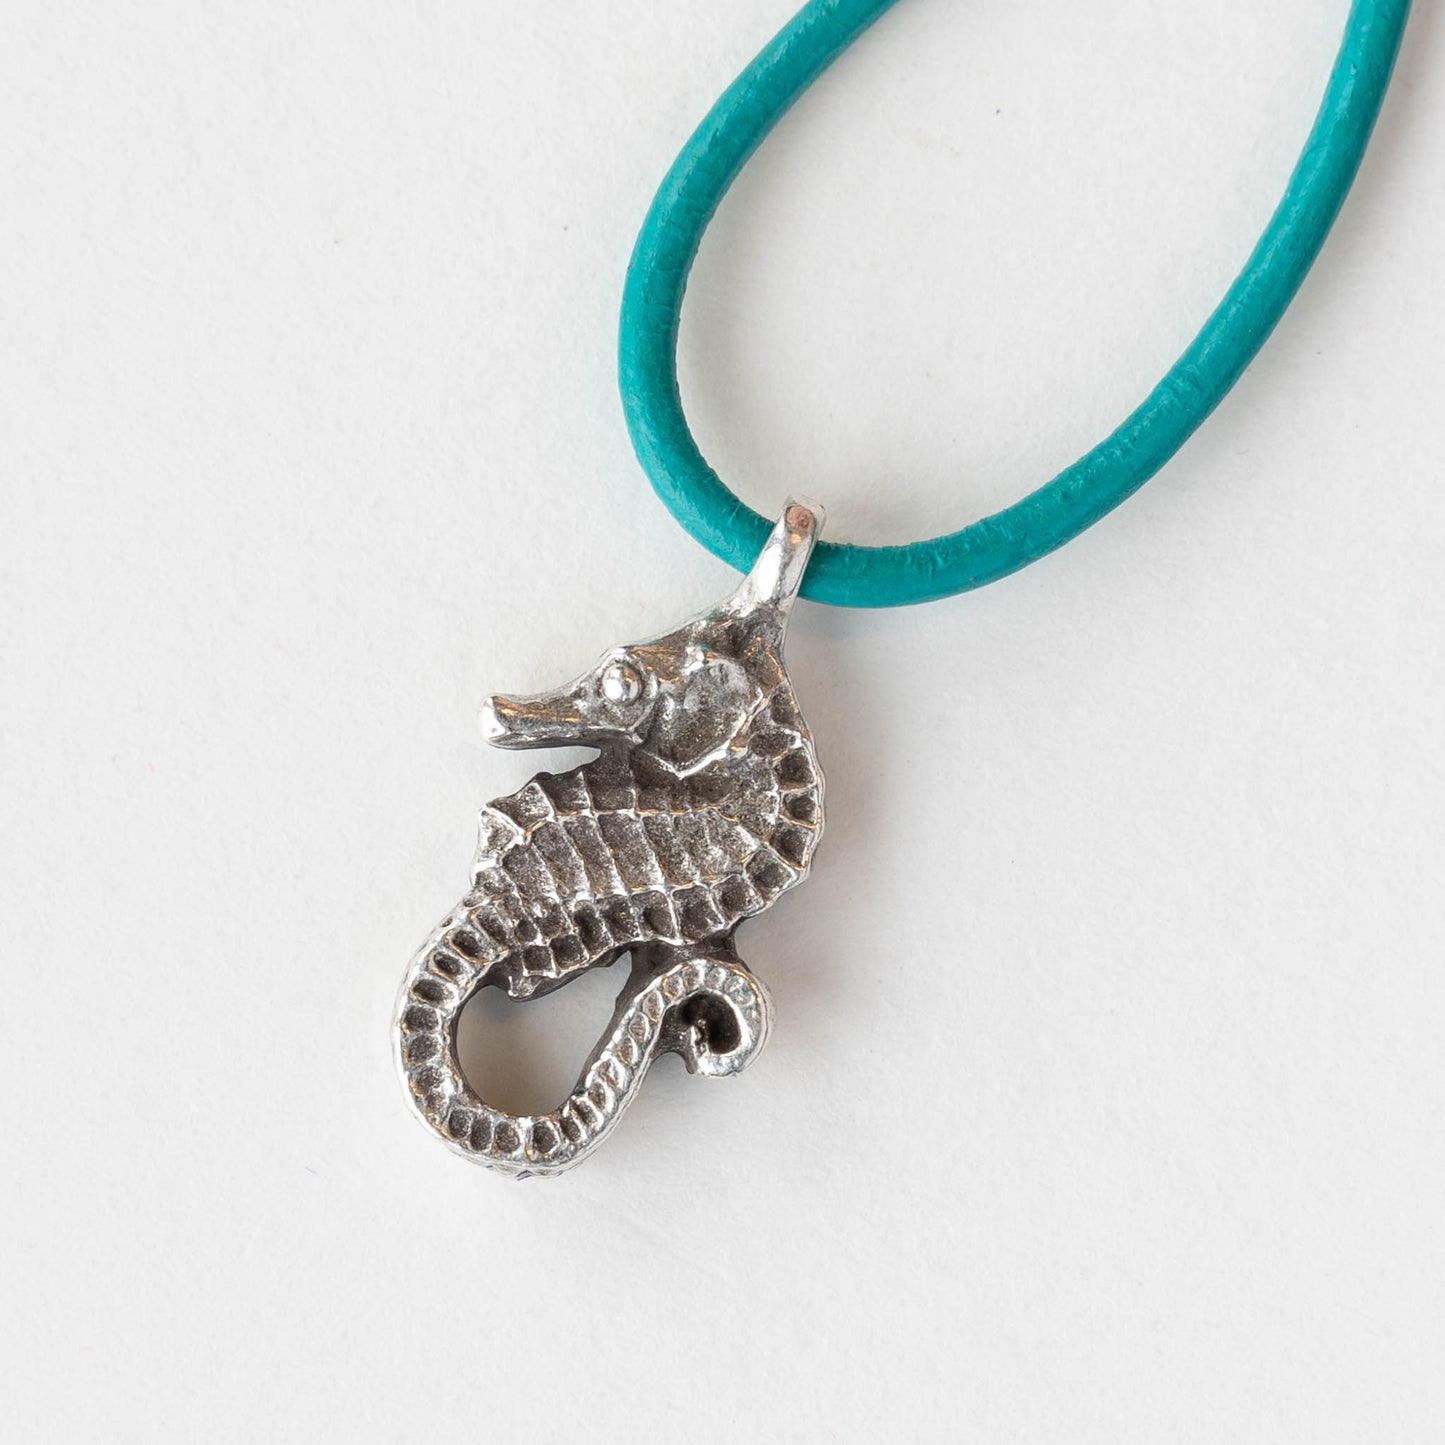 Seahorse Pendant or Charm - Pewter - 2 or 6